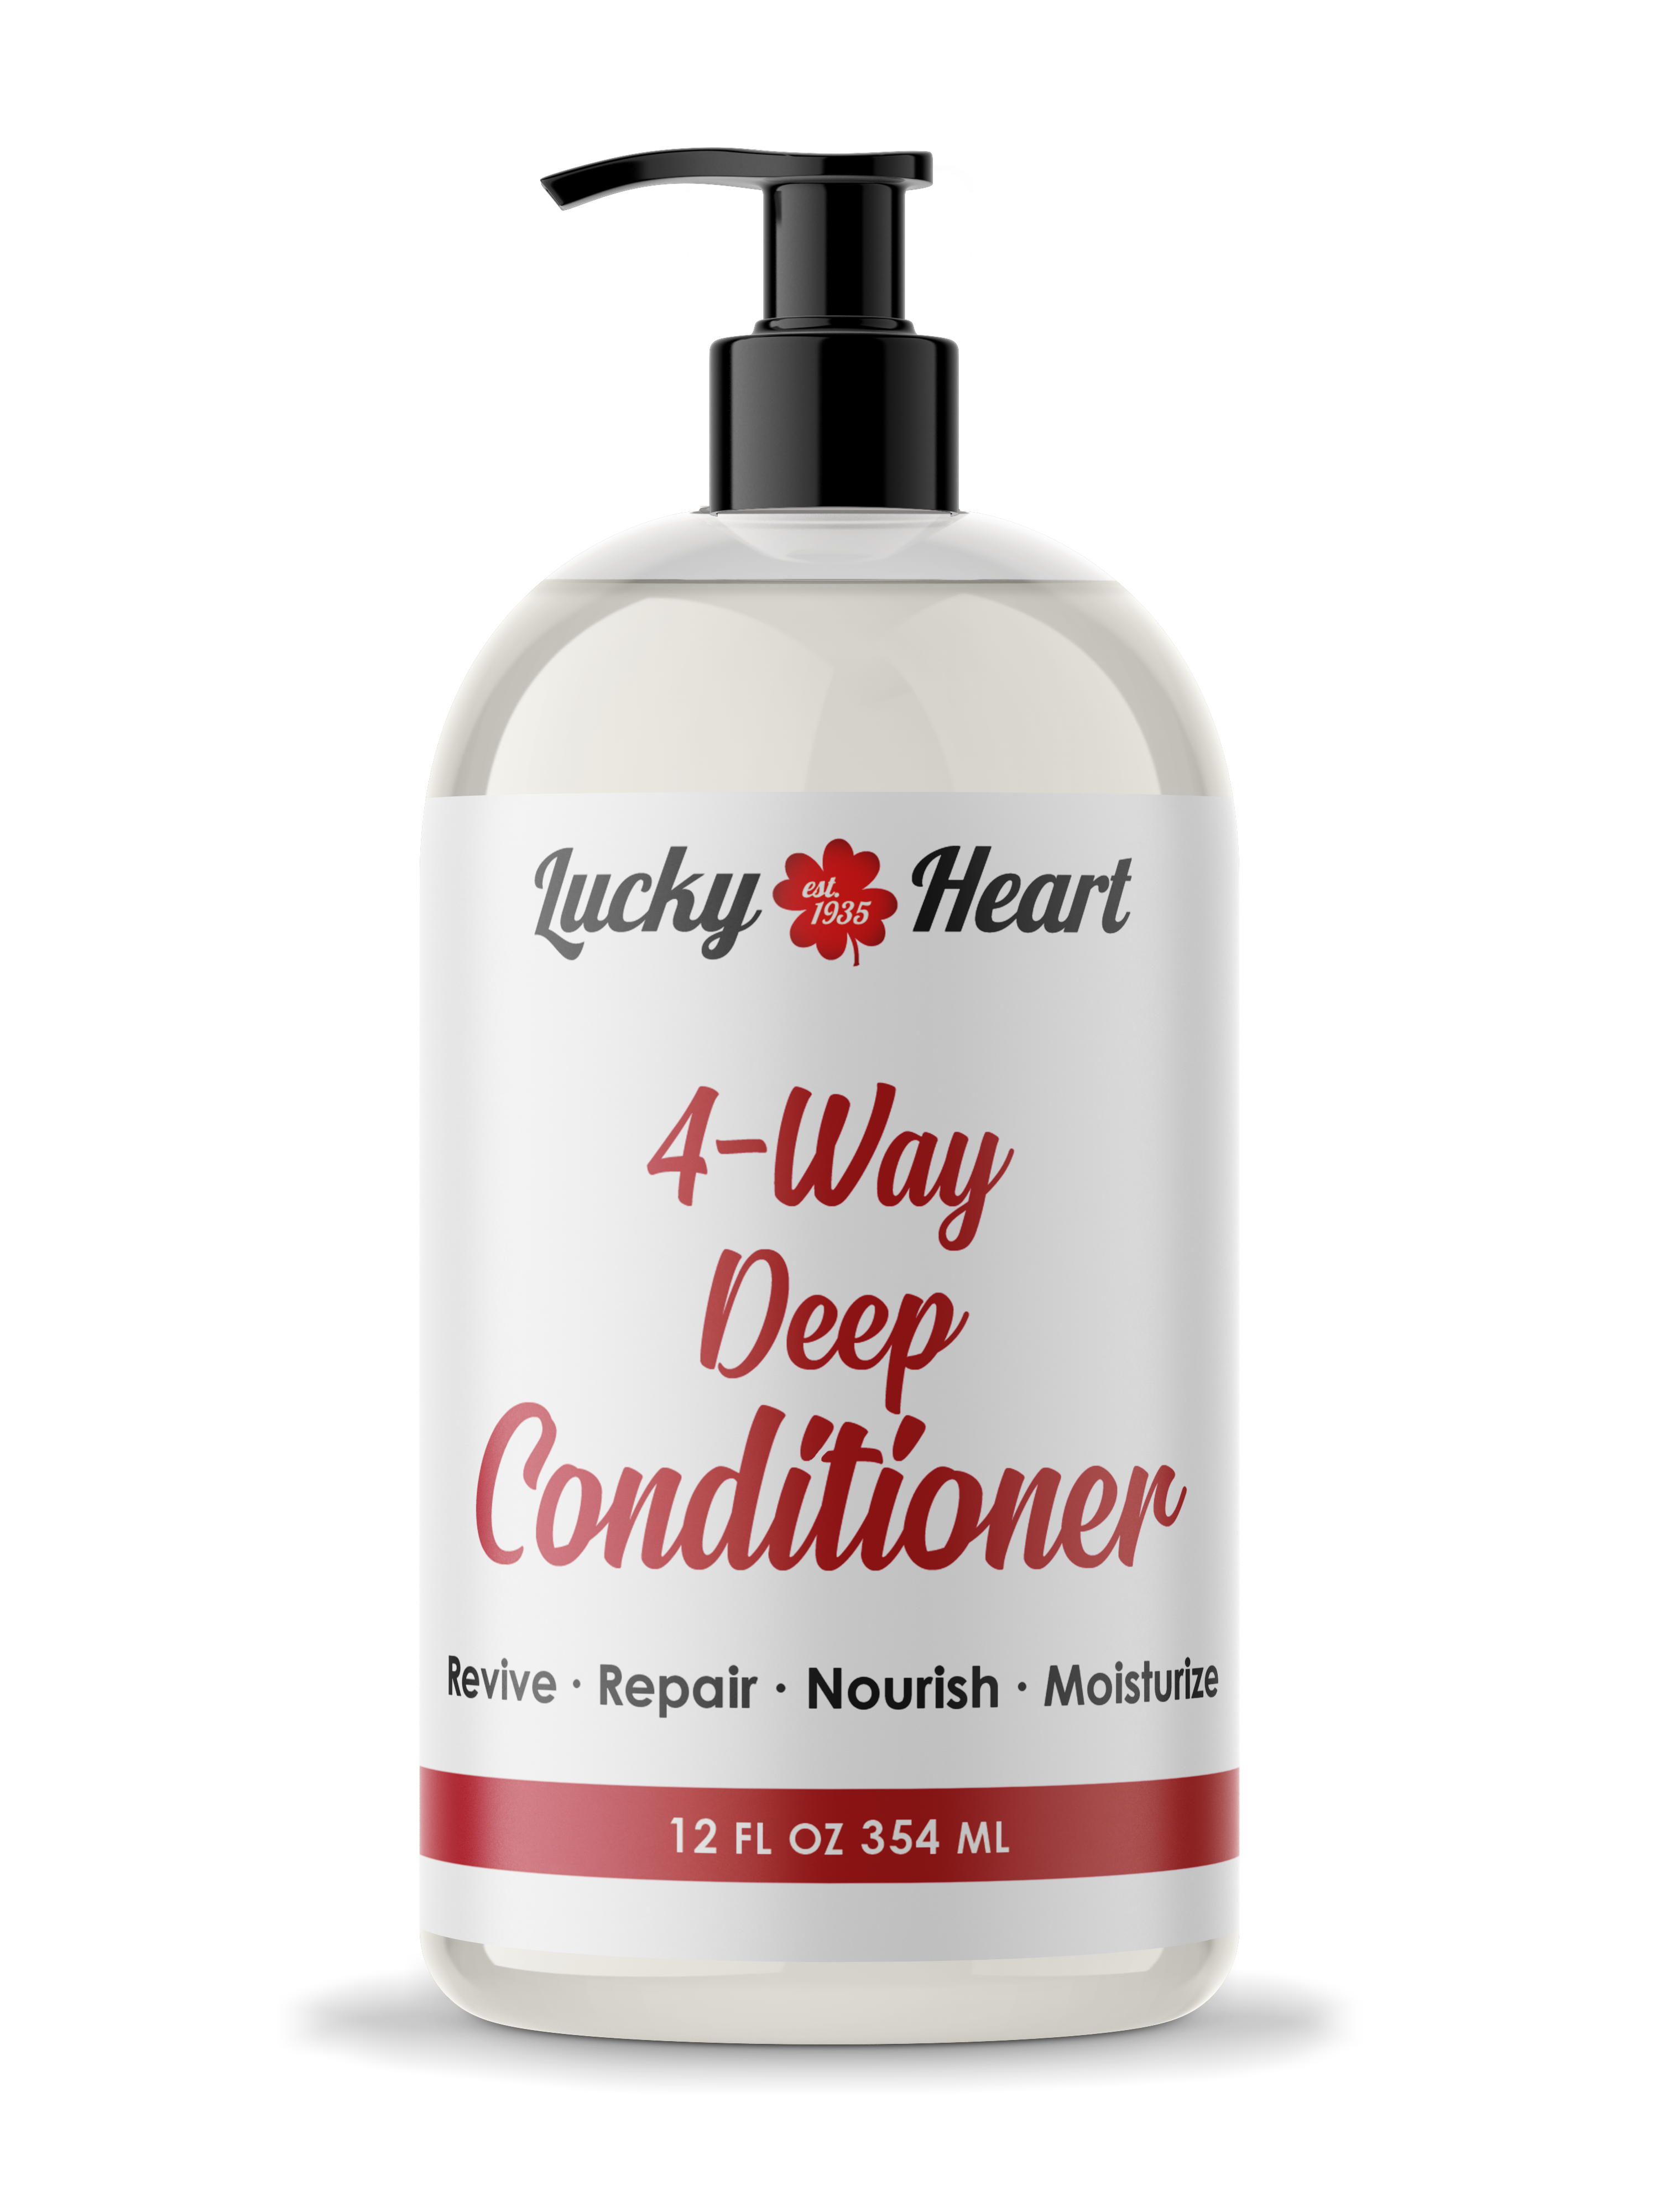 Deep conditioner for reviving and moisturizing hair made by Lucky Heart Cosmetics